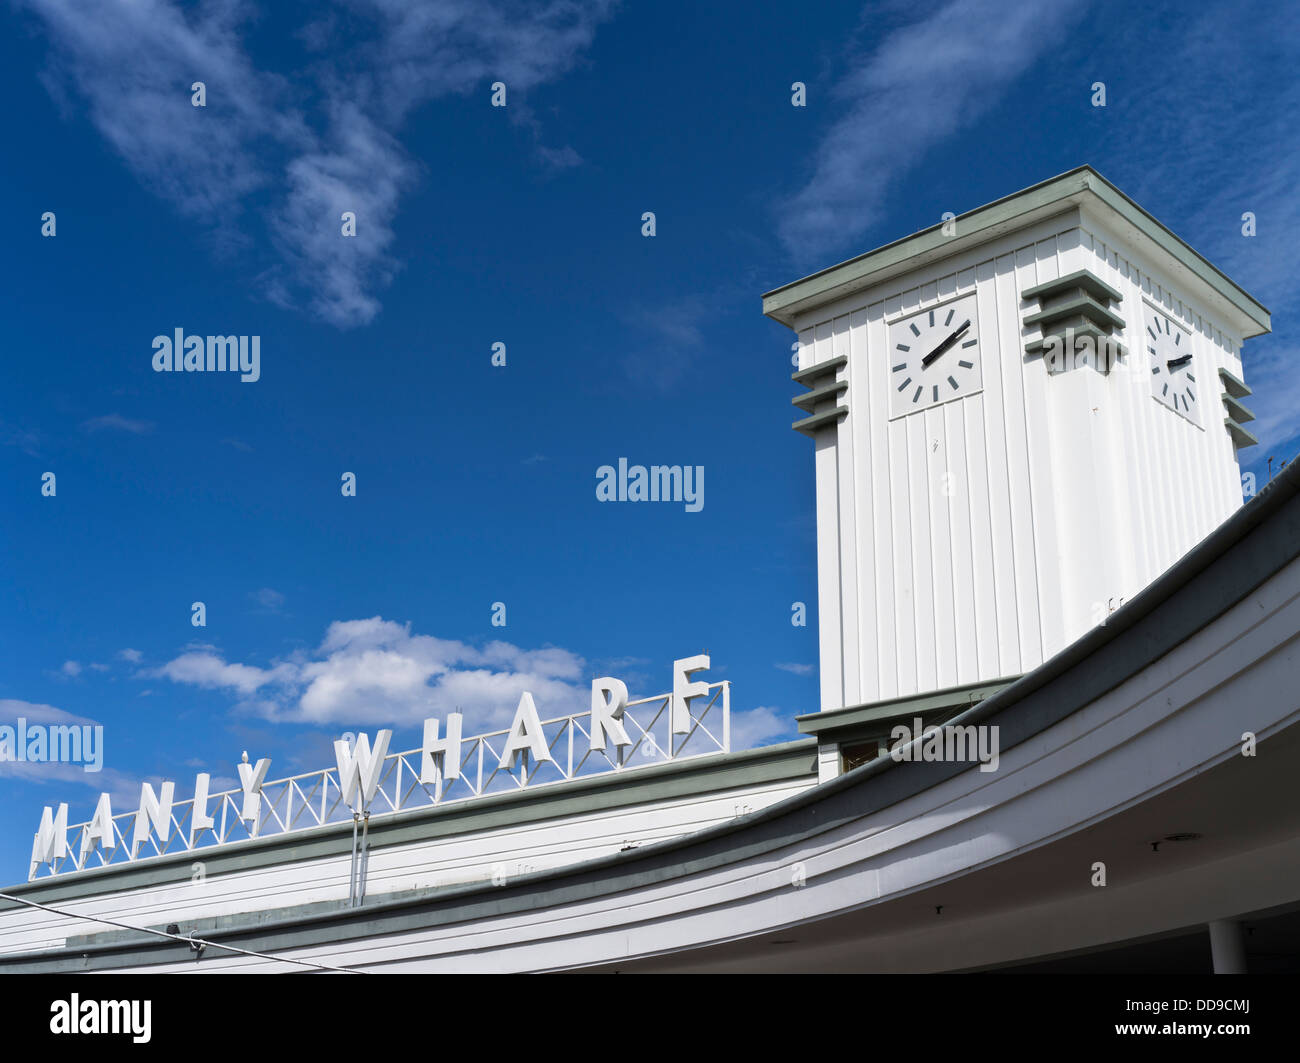 dh MANLY Australien Manly Wharf Pier Clock tower sydney Stockfoto